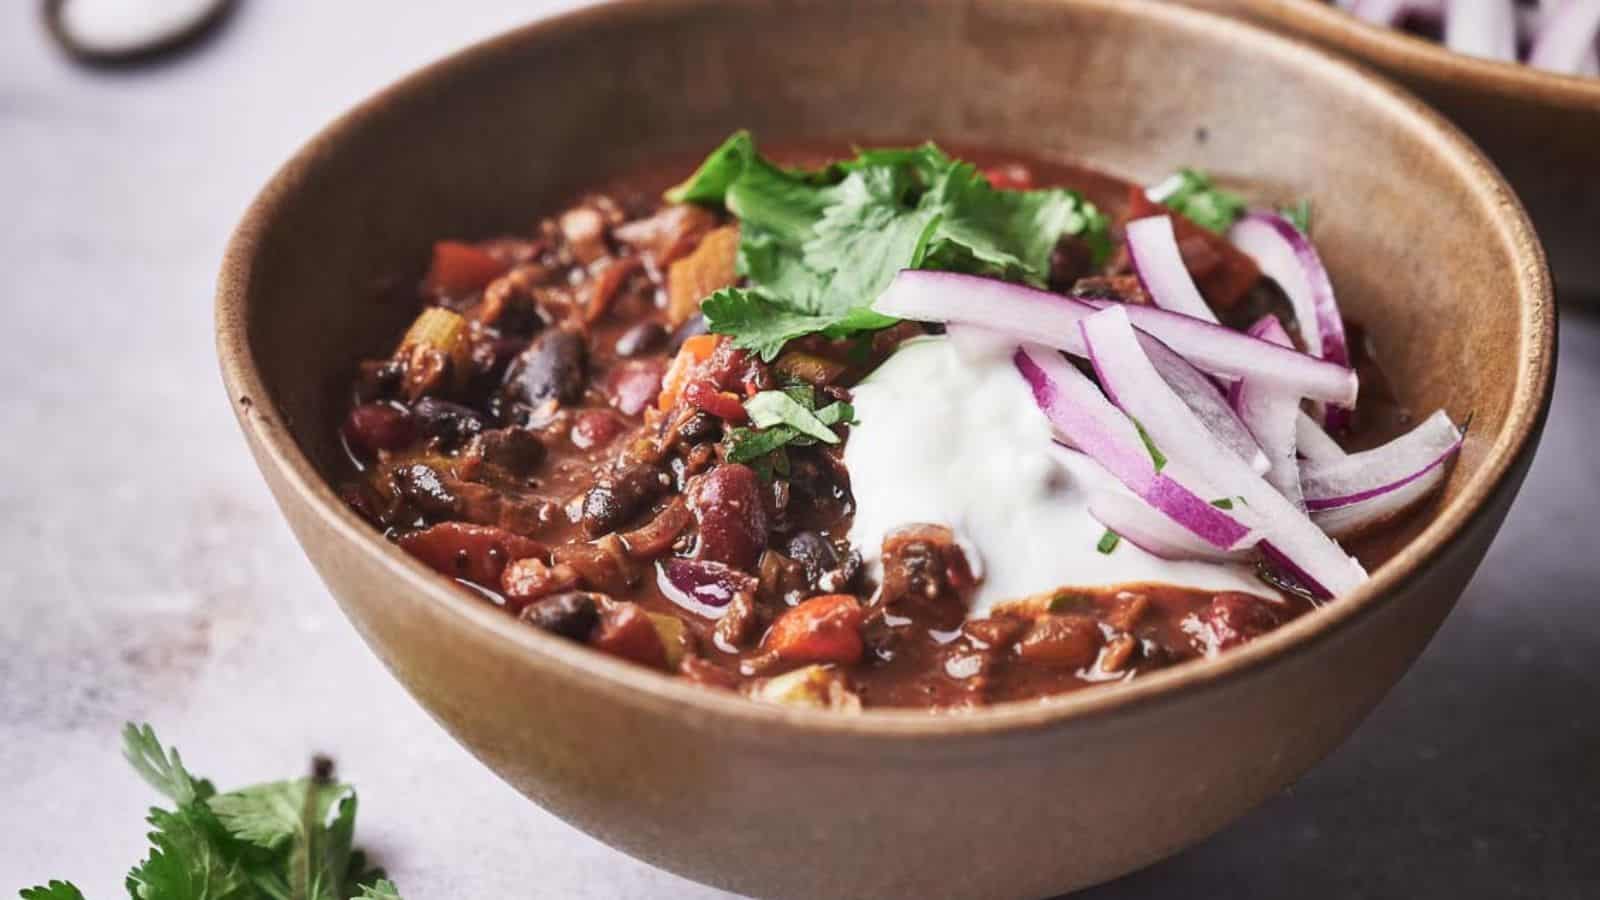 <p>Face Thursday head-on with a piping hot bowl of our Epic Bean Chili. There is nothing quite like the comforting embrace of a hearty chili to make you feel at home. As you enjoy each spoonful, feel the anticipation of Friday build-up. It’s a dish that resonates with the joyful atmosphere of an approaching weekend.<br><strong>Get the Recipe: </strong><a href="https://www.splashoftaste.com/tasty-vegetarian-chilli/?utm_source=msn&utm_medium=page&utm_campaign=msn">Epic Bean Chili</a></p>